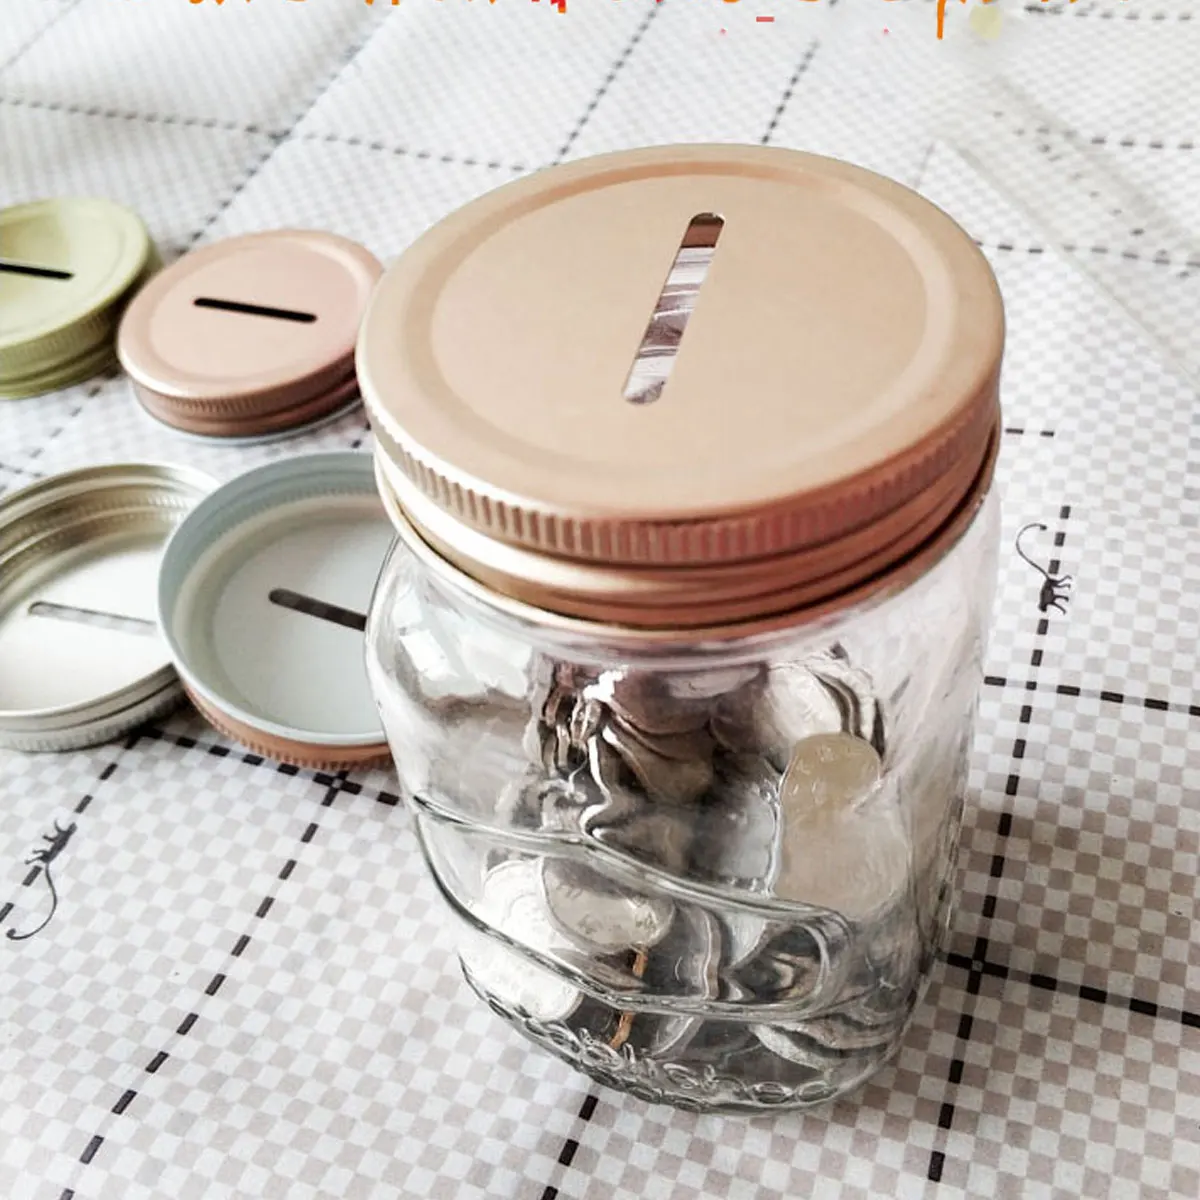 inhzoy 8 Pack Rust Proof Metal Coin Slot Bank Lid for Normal Regular Mouth/Wide Mouth Mason Jars Money Saving Jars 03 Rose 70mm 